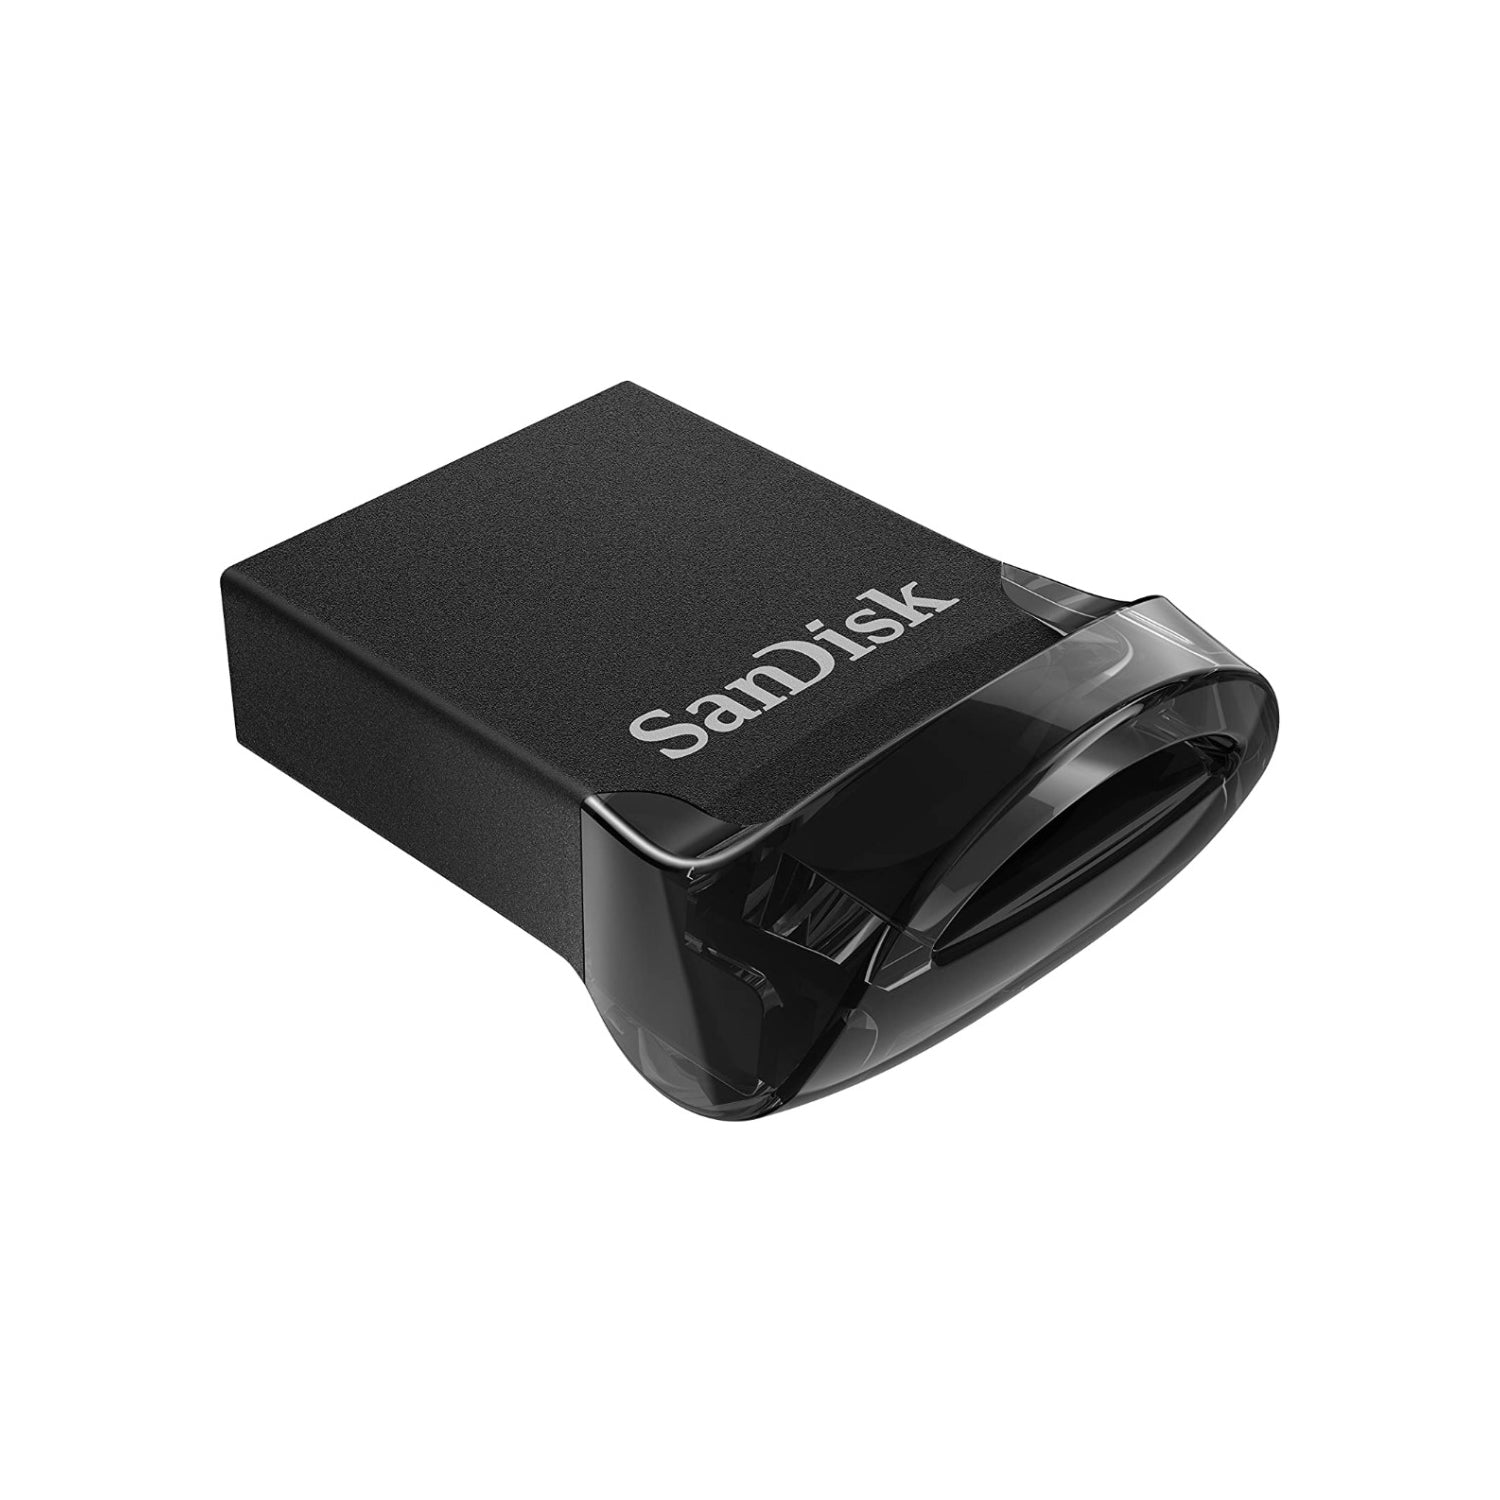 SanDisk Ultra Fit USB 3.1 Flash Drive with Up to 130MB/s Read Speed